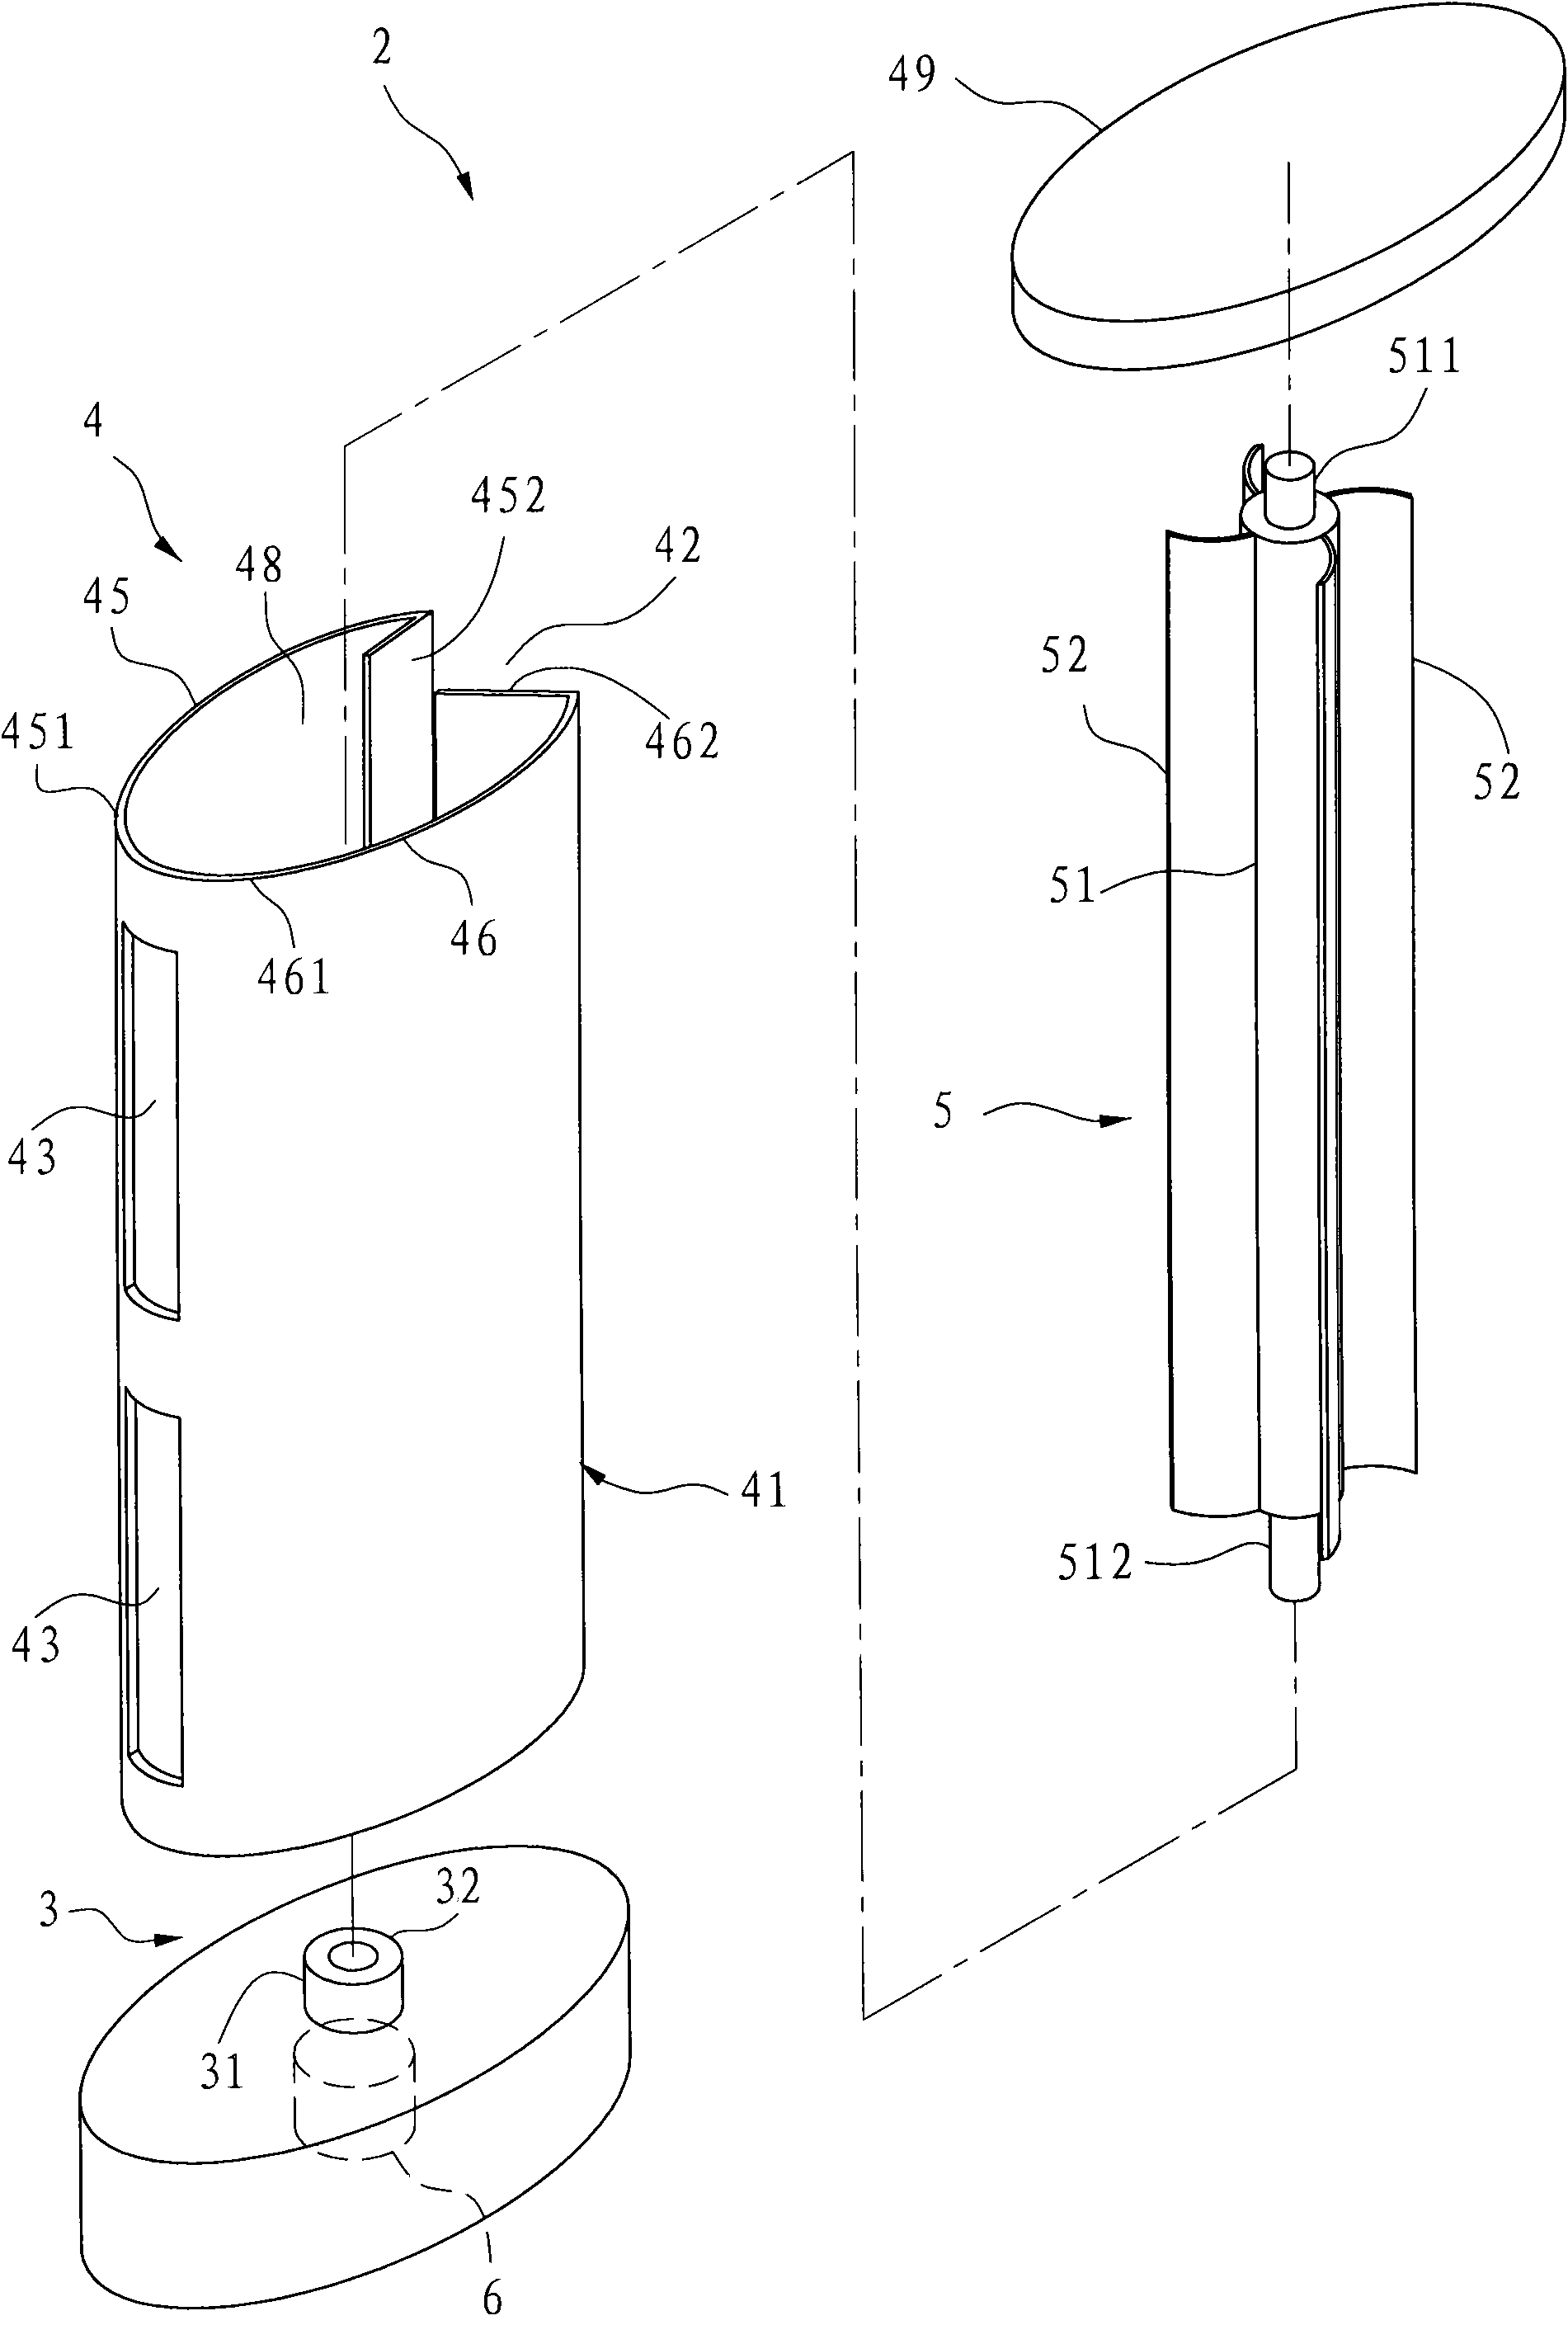 Power generating device capable of collecting wind along wind direction